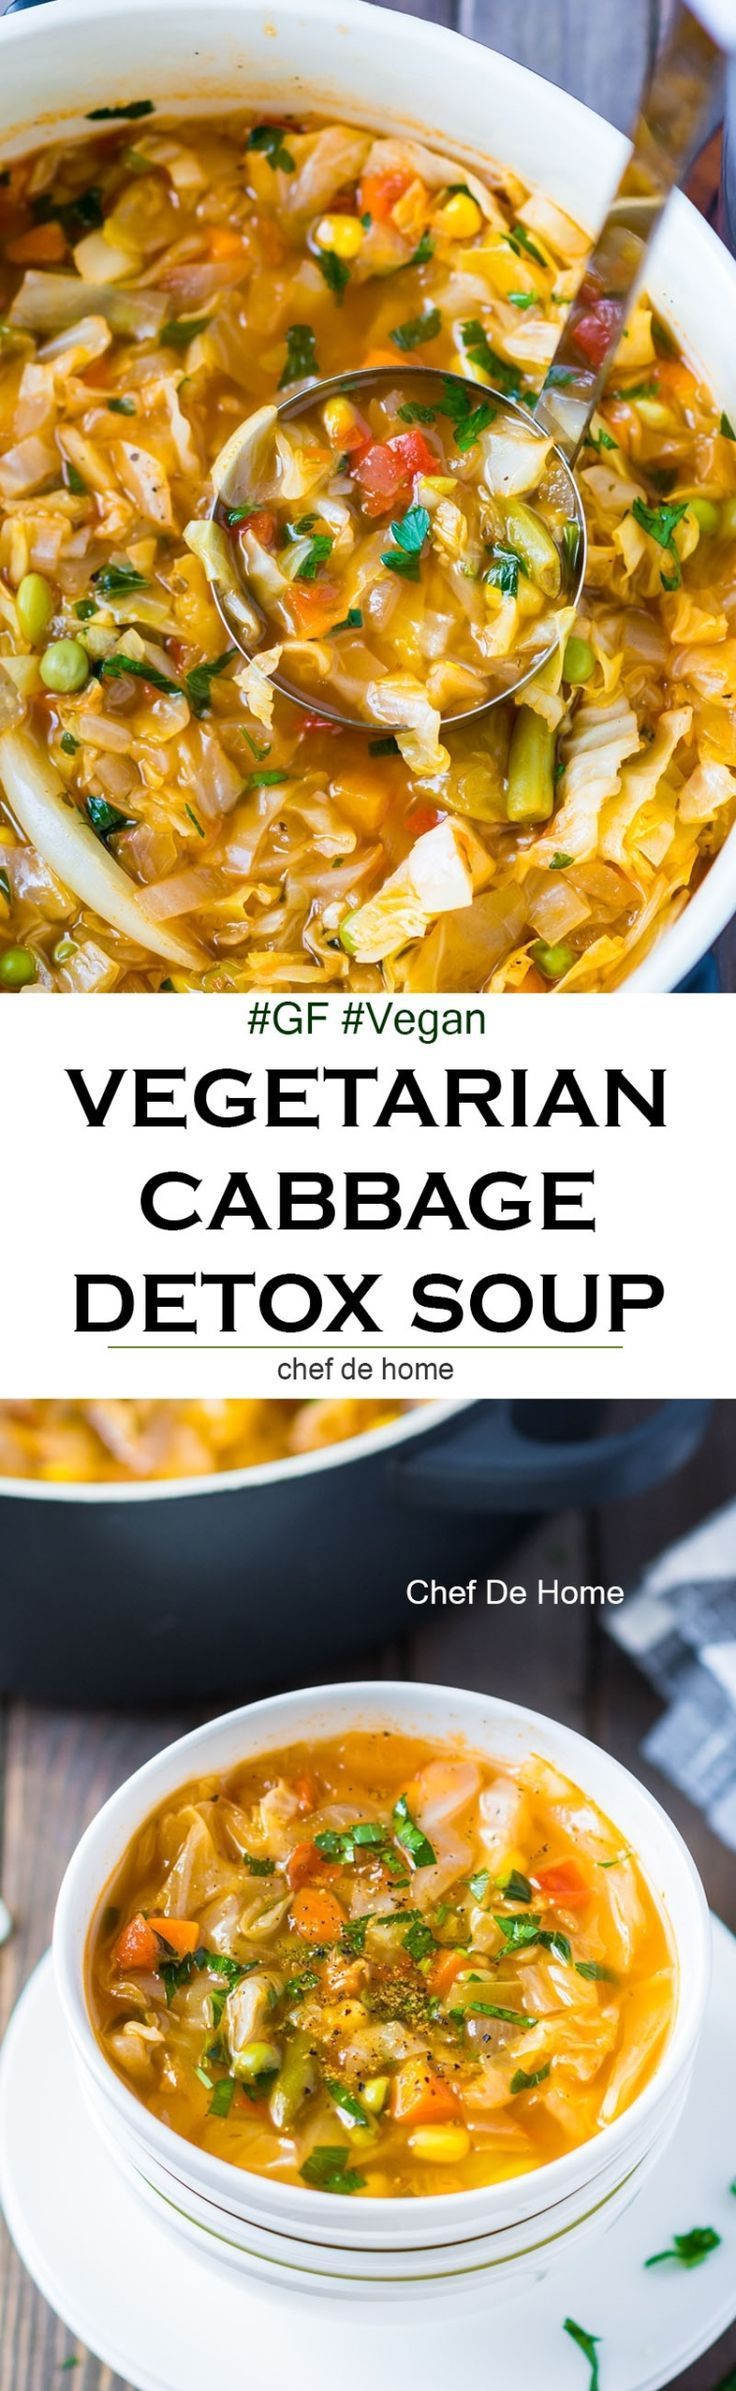 Vegetarian Cabbage Soup An easy and healthy vegetarian cabbage soup for soup detox diet. This soup is so flavorful you will not